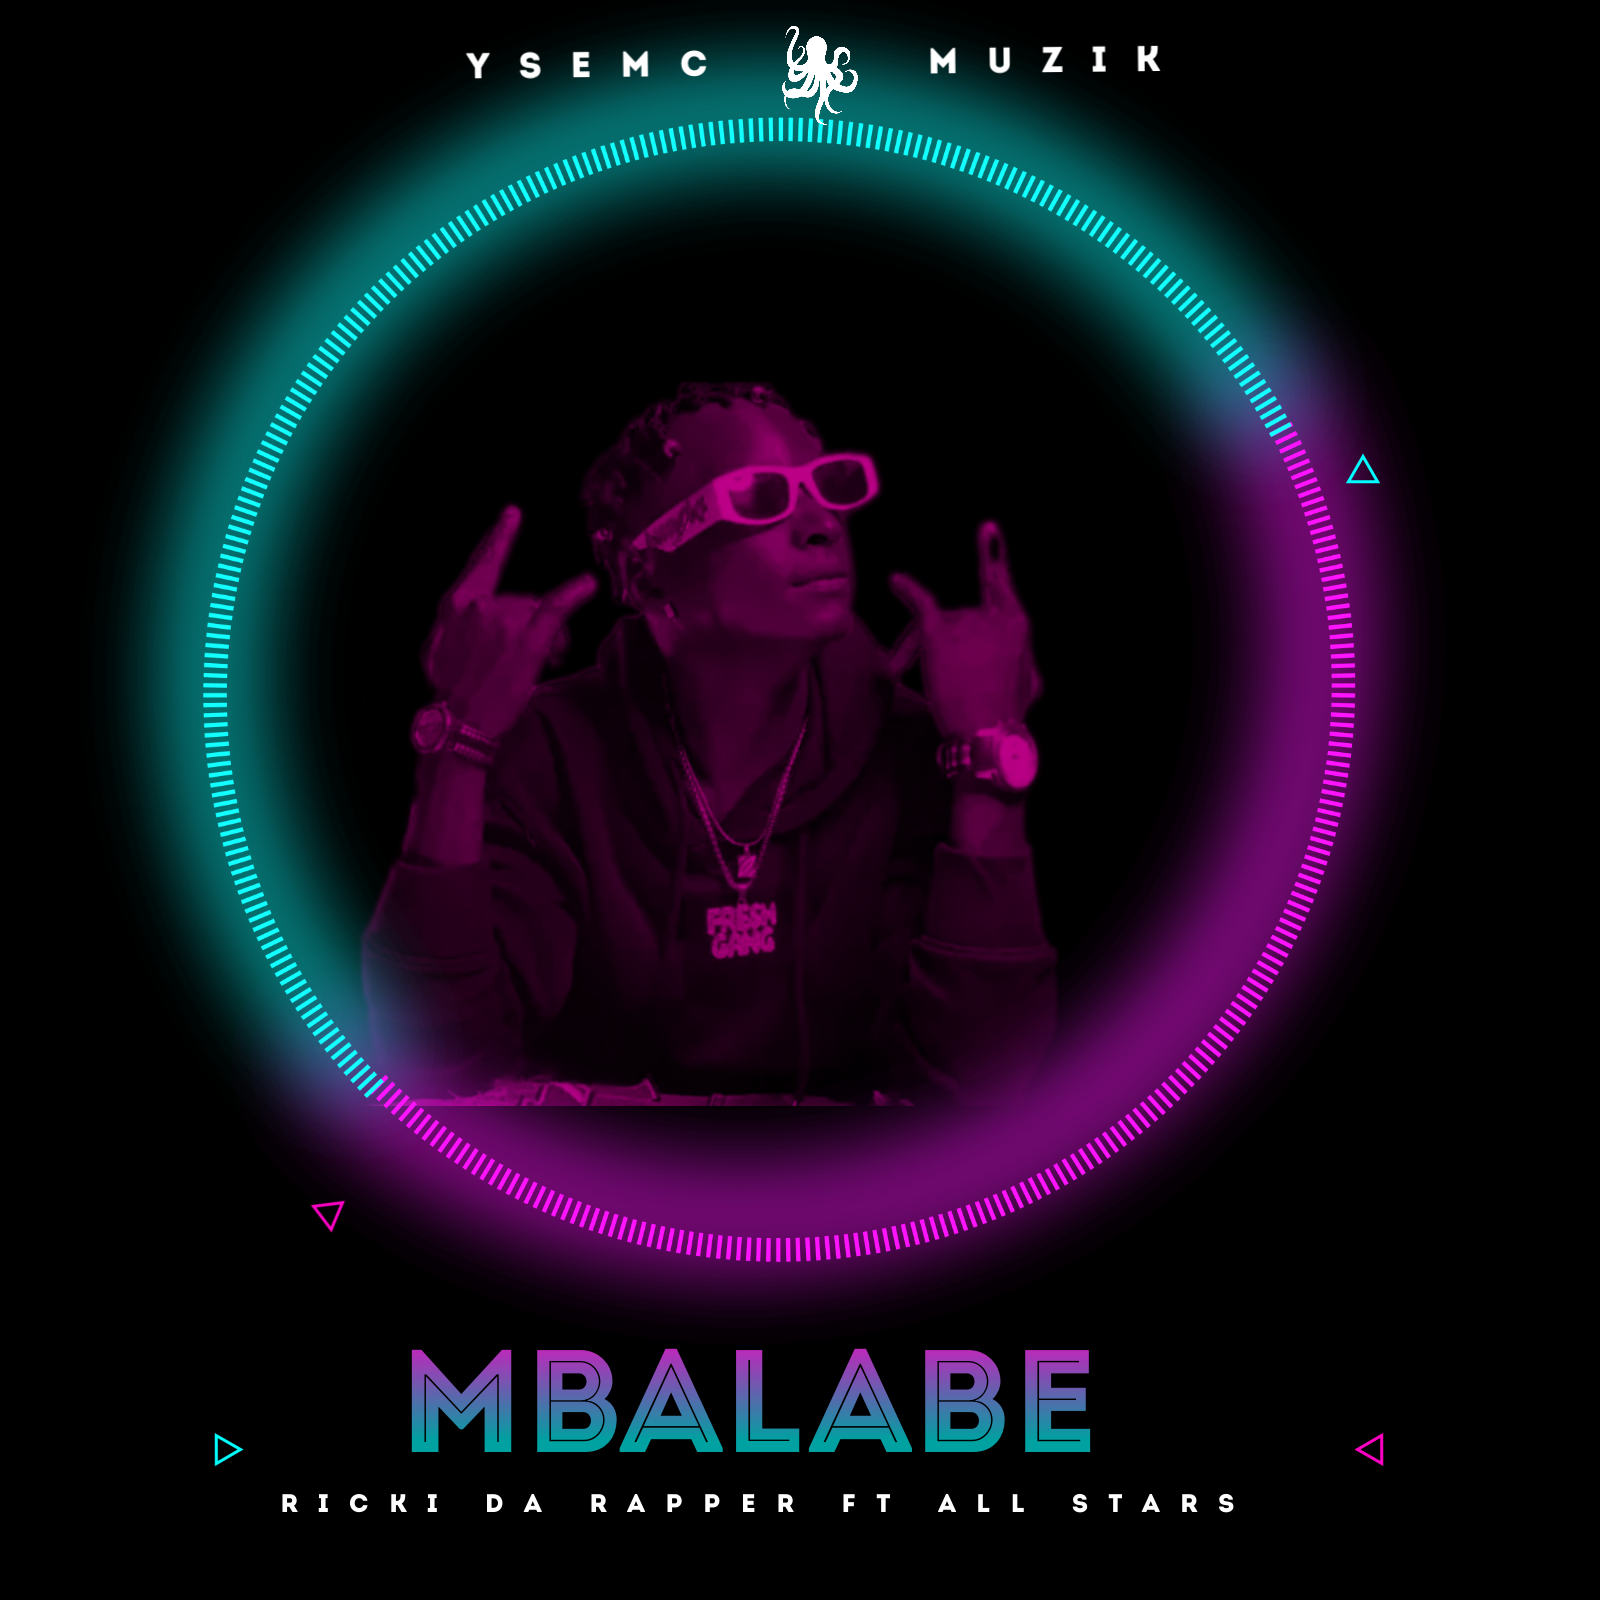 Mbalabe